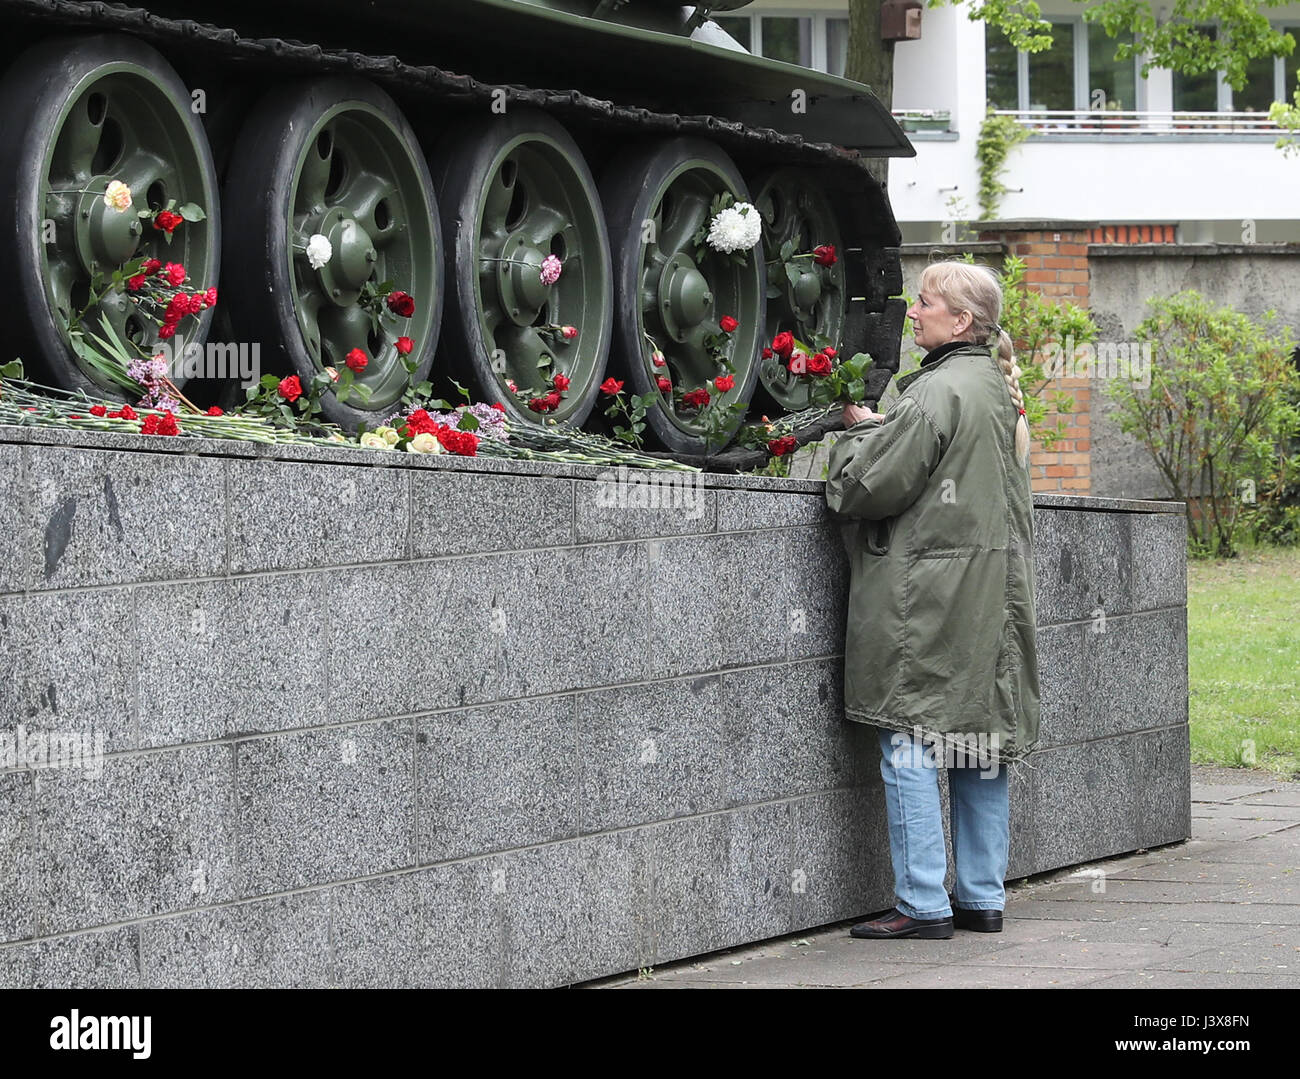 Berlin, Germany. 8th May, 2017. A woman presents flowers near a tank model during a series of memorial activities to commemorate the 72nd anniversary of the end of World World II in Europe, known as Victory in Europe Day at German-Russian Museum in Berlin, capital of Germany, on May 8, 2017. Credit: Shan Yuqi/Xinhua/Alamy Live News Stock Photo